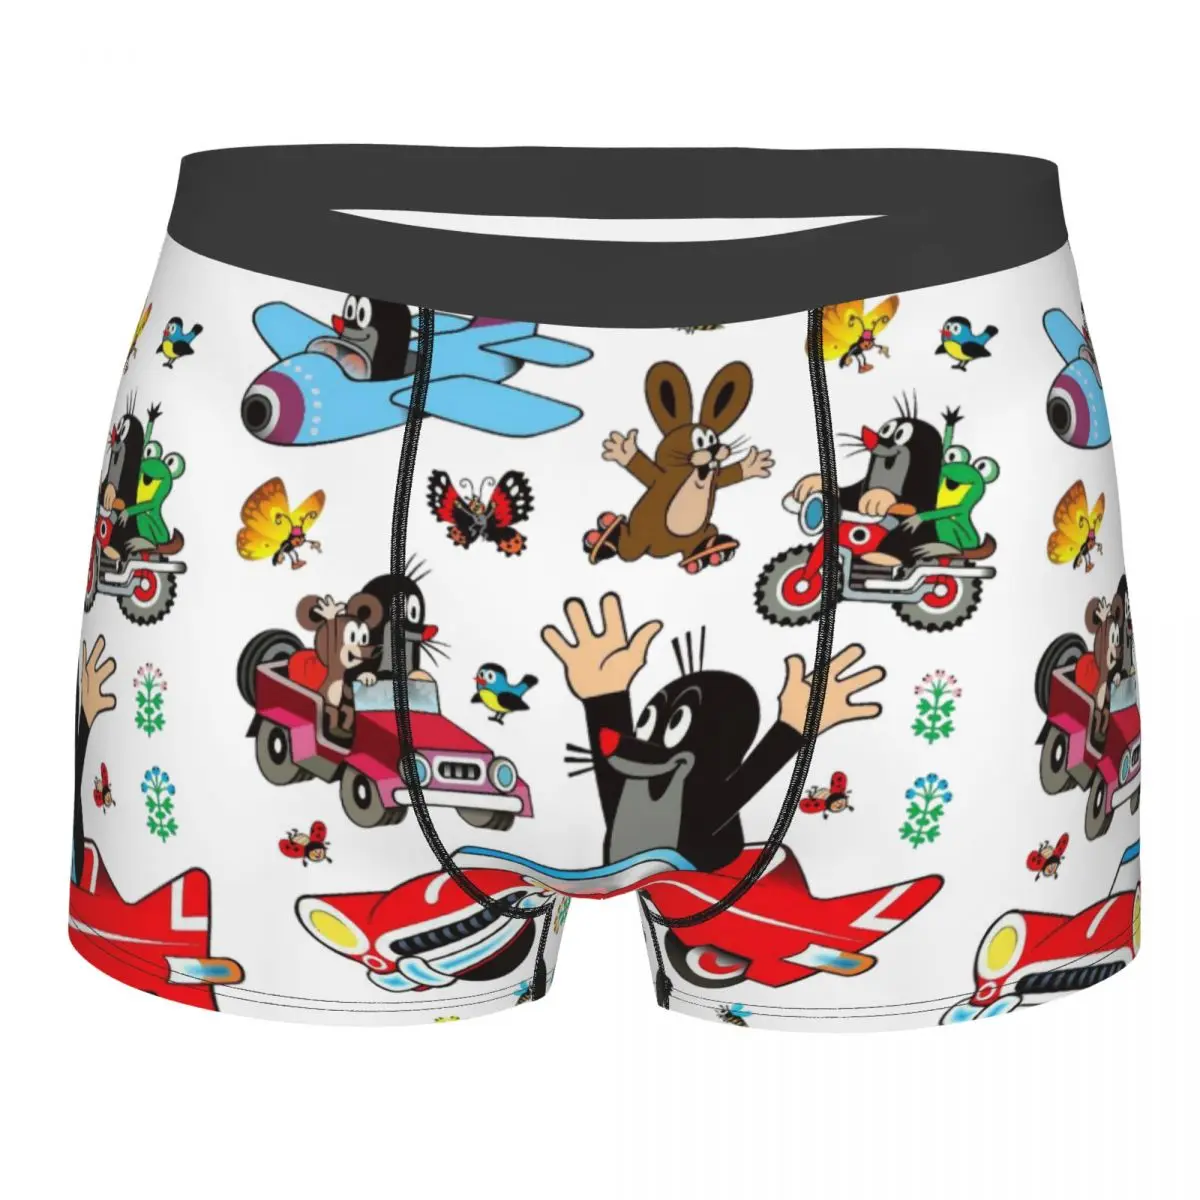 Krtek Little Maulwurf Mencosy Boxer Briefs,3D printing Underwear, Highly Breathable Top Quality Gift Idea killer klowns from outer space horror film men boxer briefs highly breathable underwear high quality print shorts gift idea